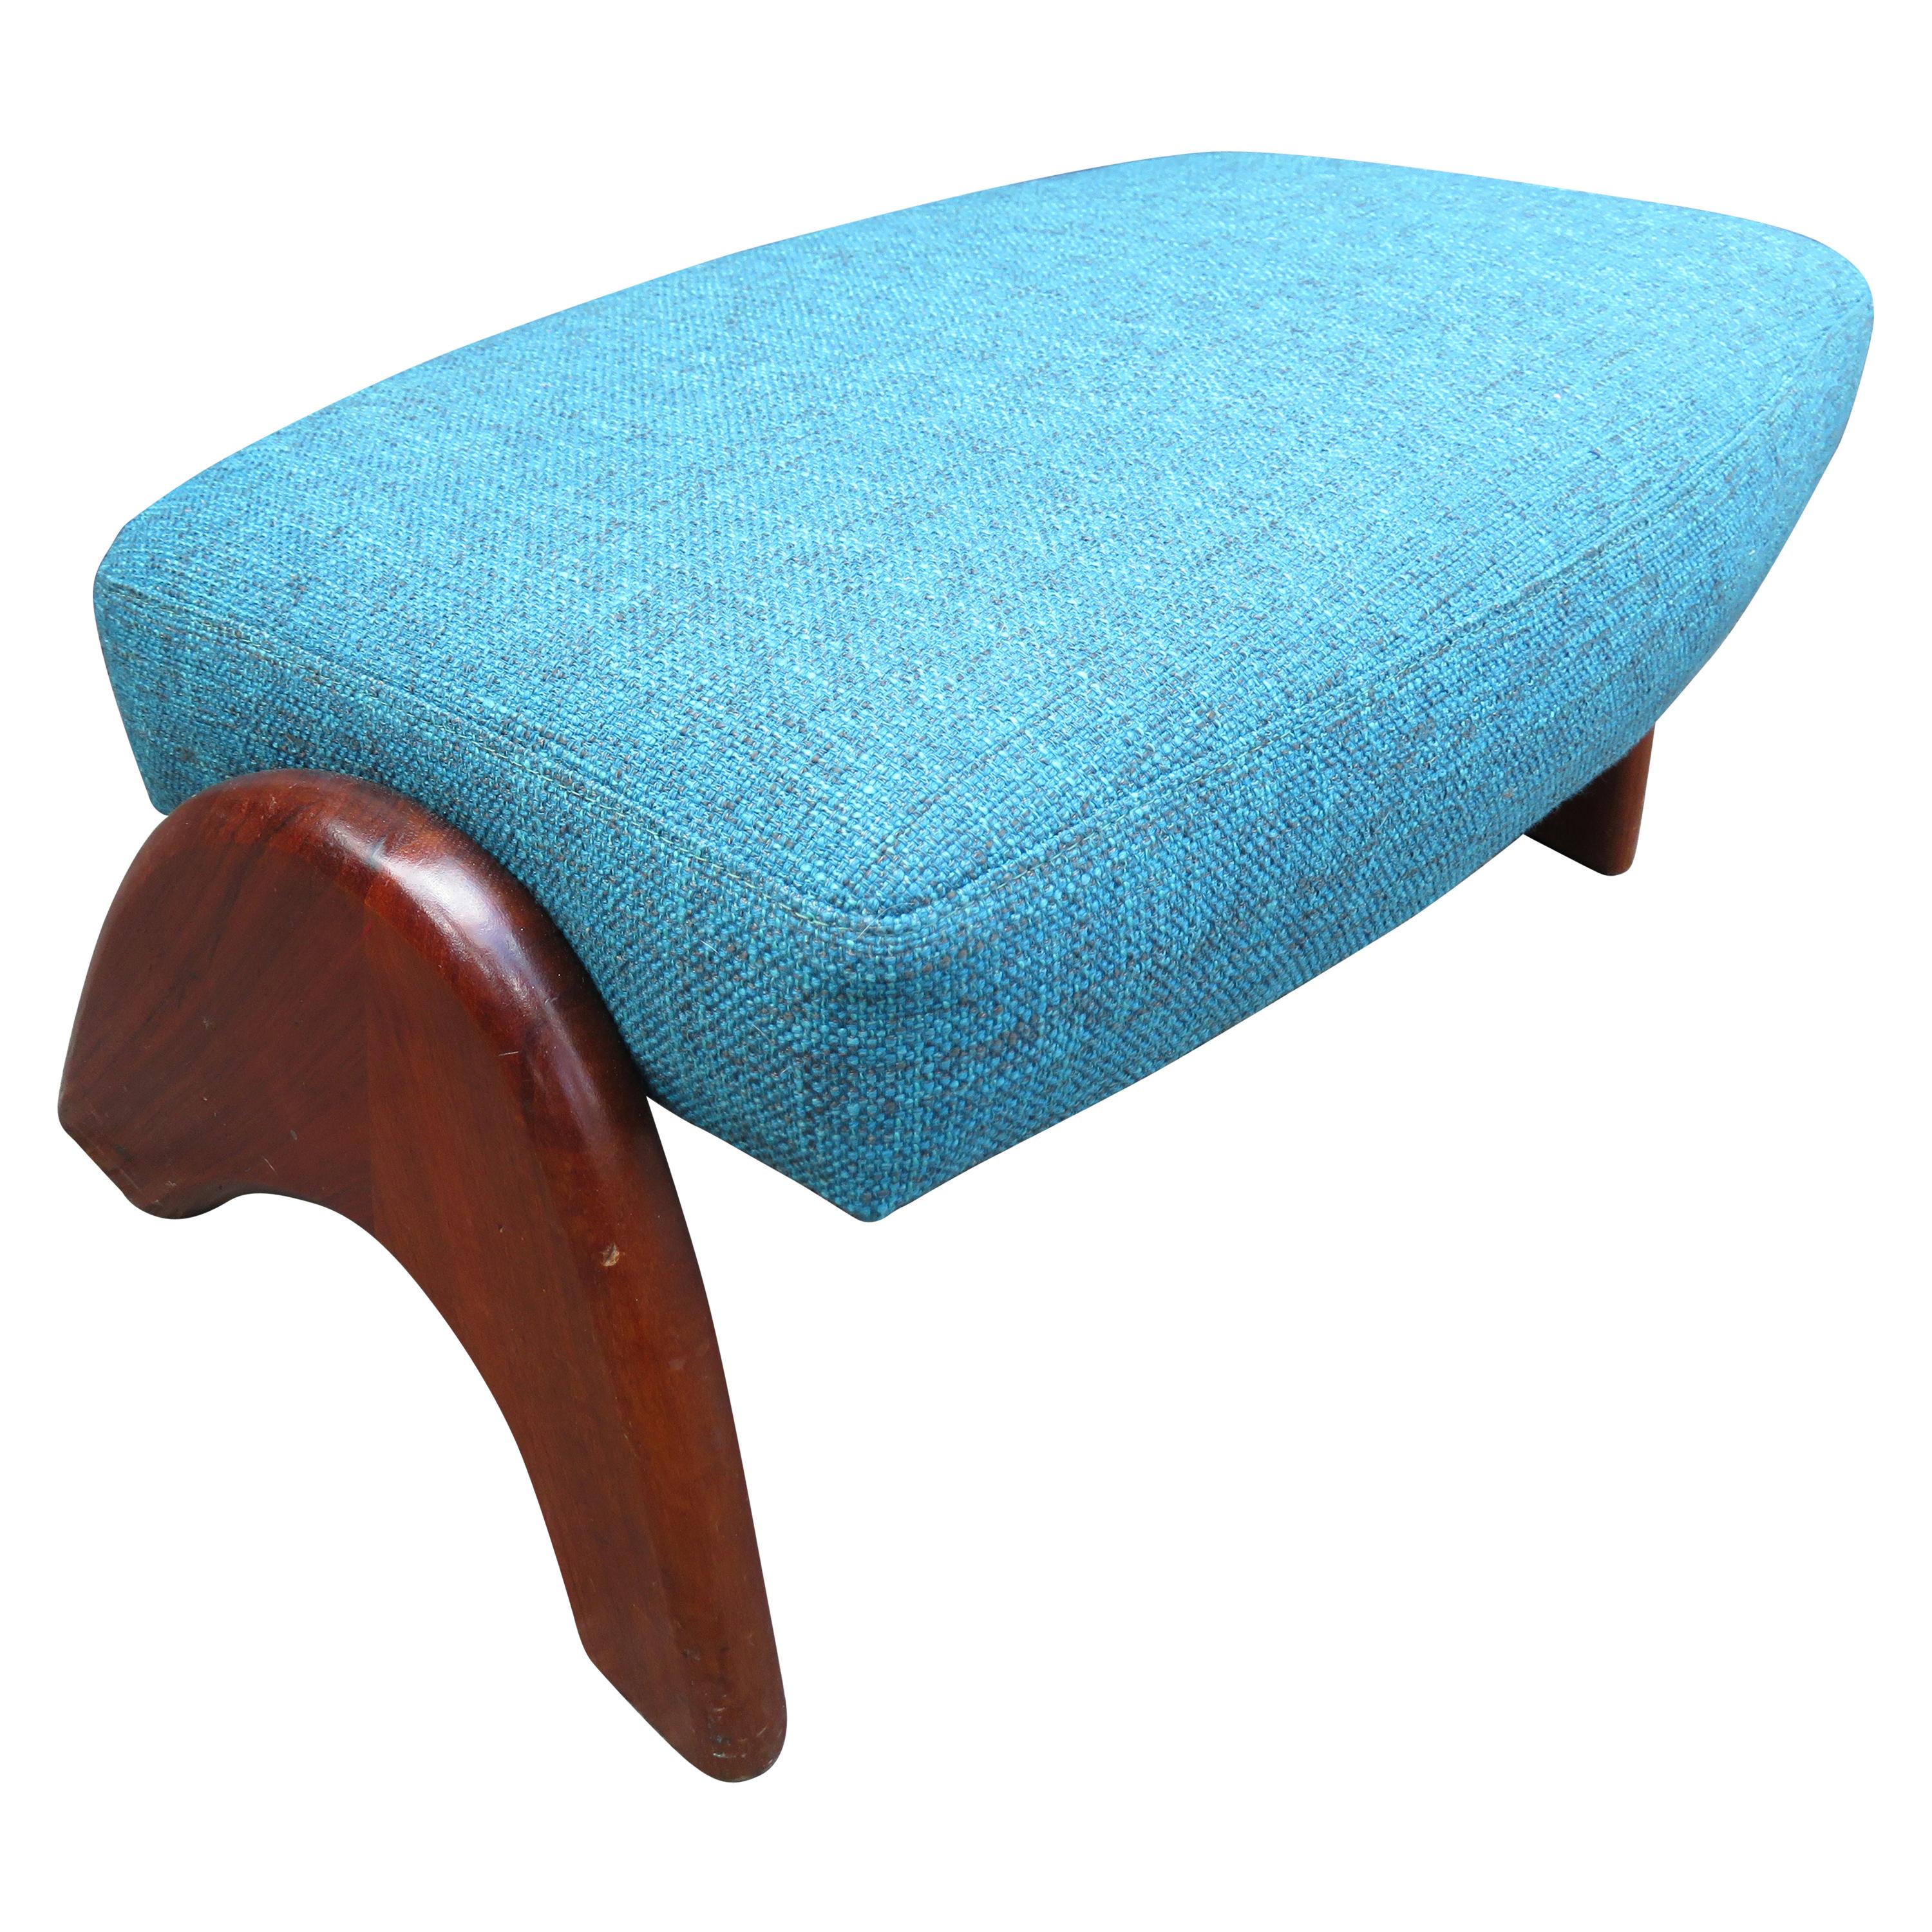 Wonderful Adrian Pearsall Ottoman for Crescent Lounge Chair Mid-Century Modern